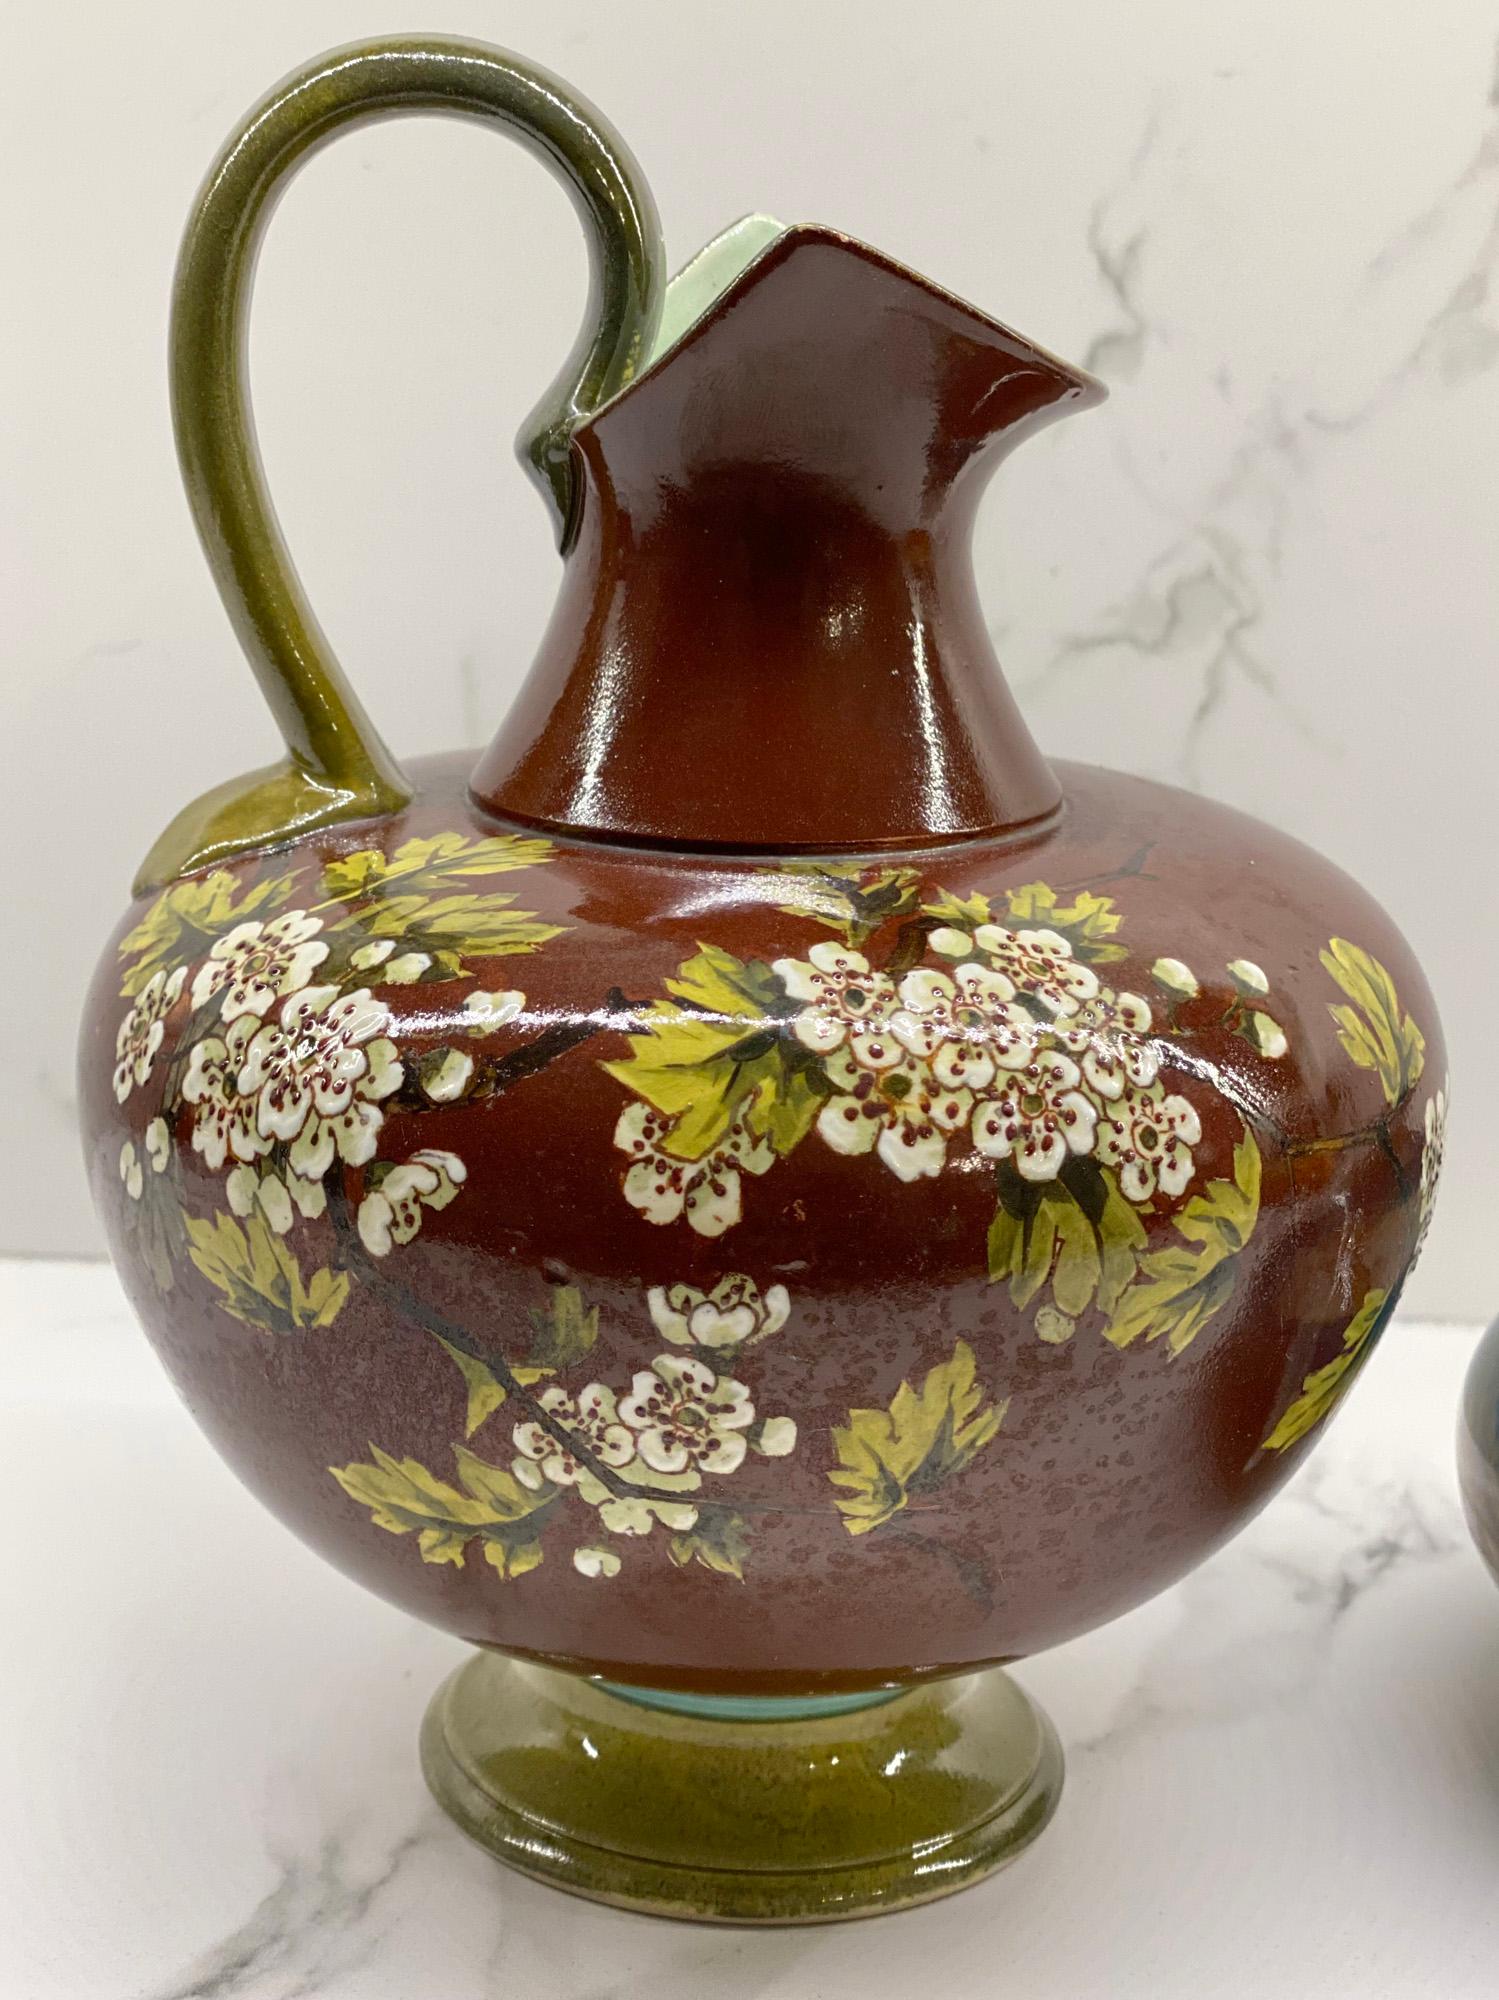 Doulton Faience hand painted floral decorated vase by John Eyre and dating from around 1885. Mdina squat rounded art glass vase by Michael Harris dating from the 1970's.